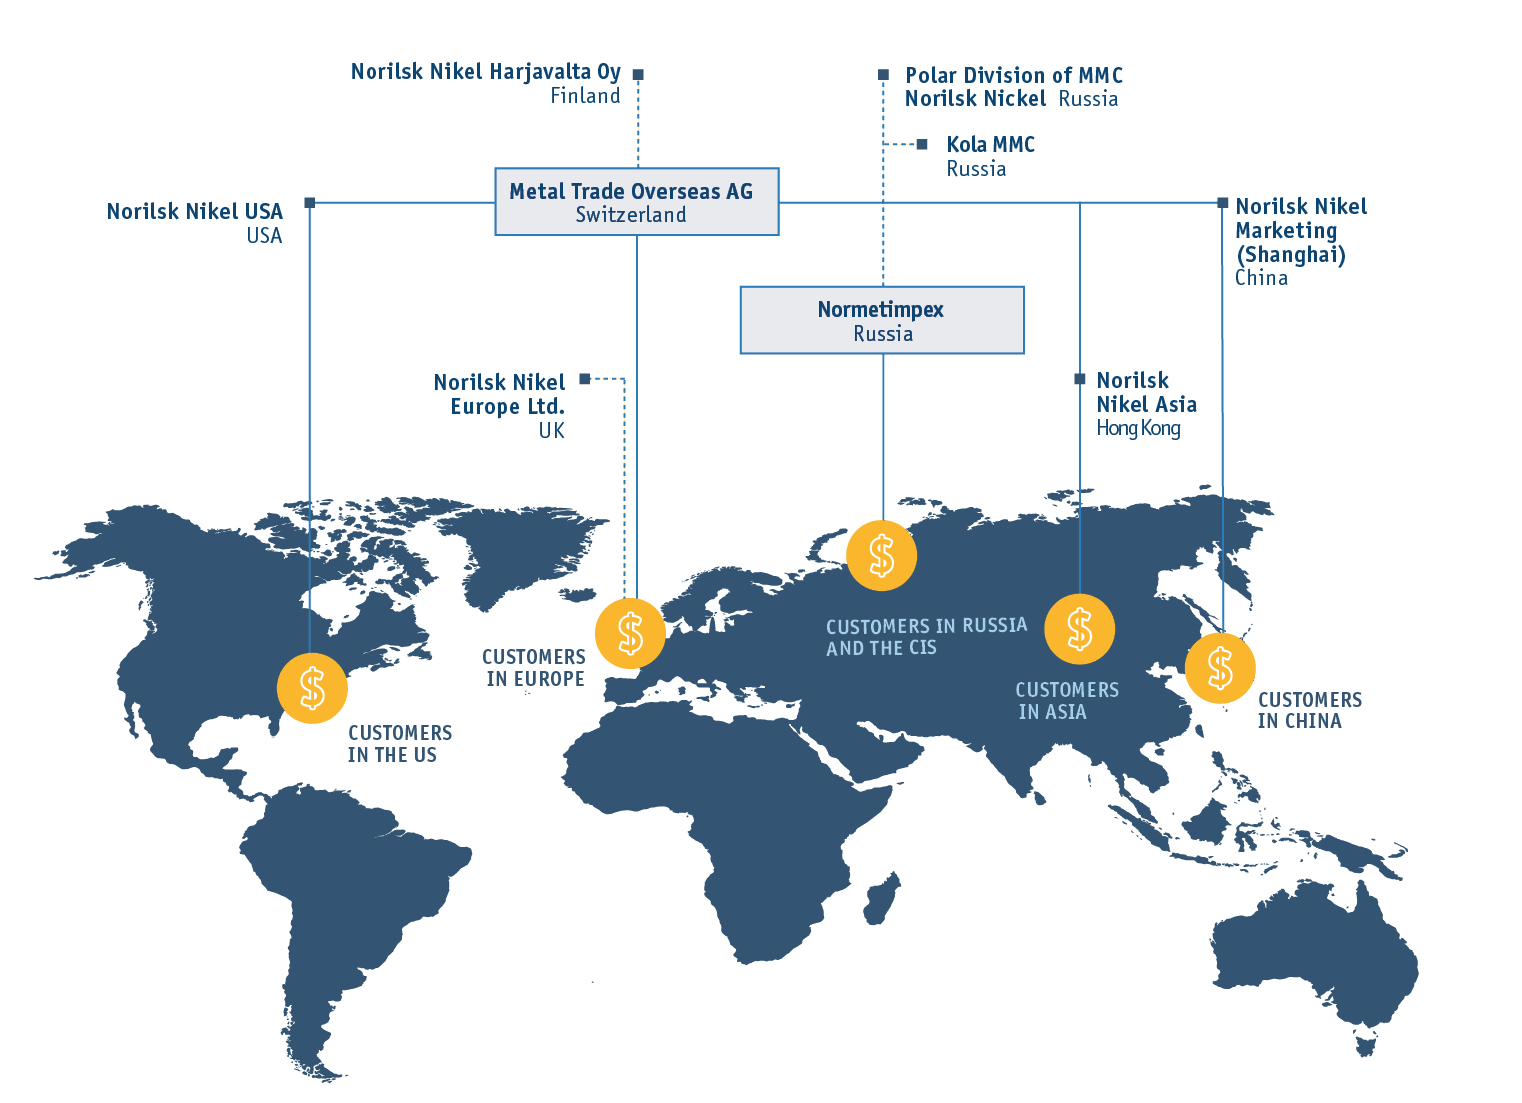 Norilsk Nickel operates its own global sales network covering all major markets